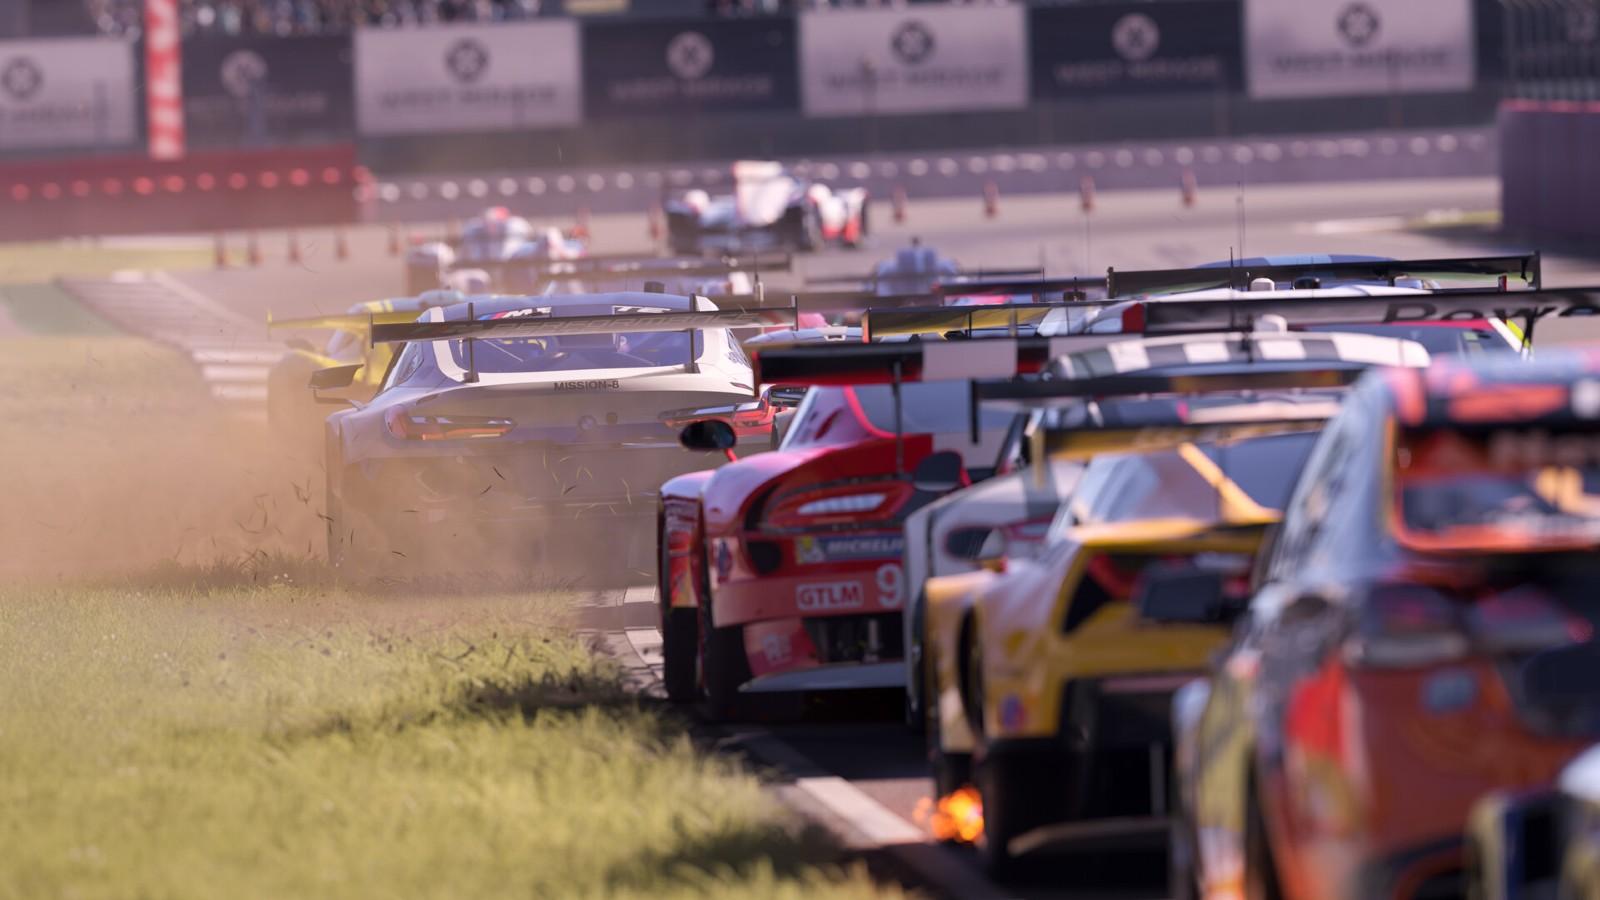 A promotional image from Forza Motorsport.